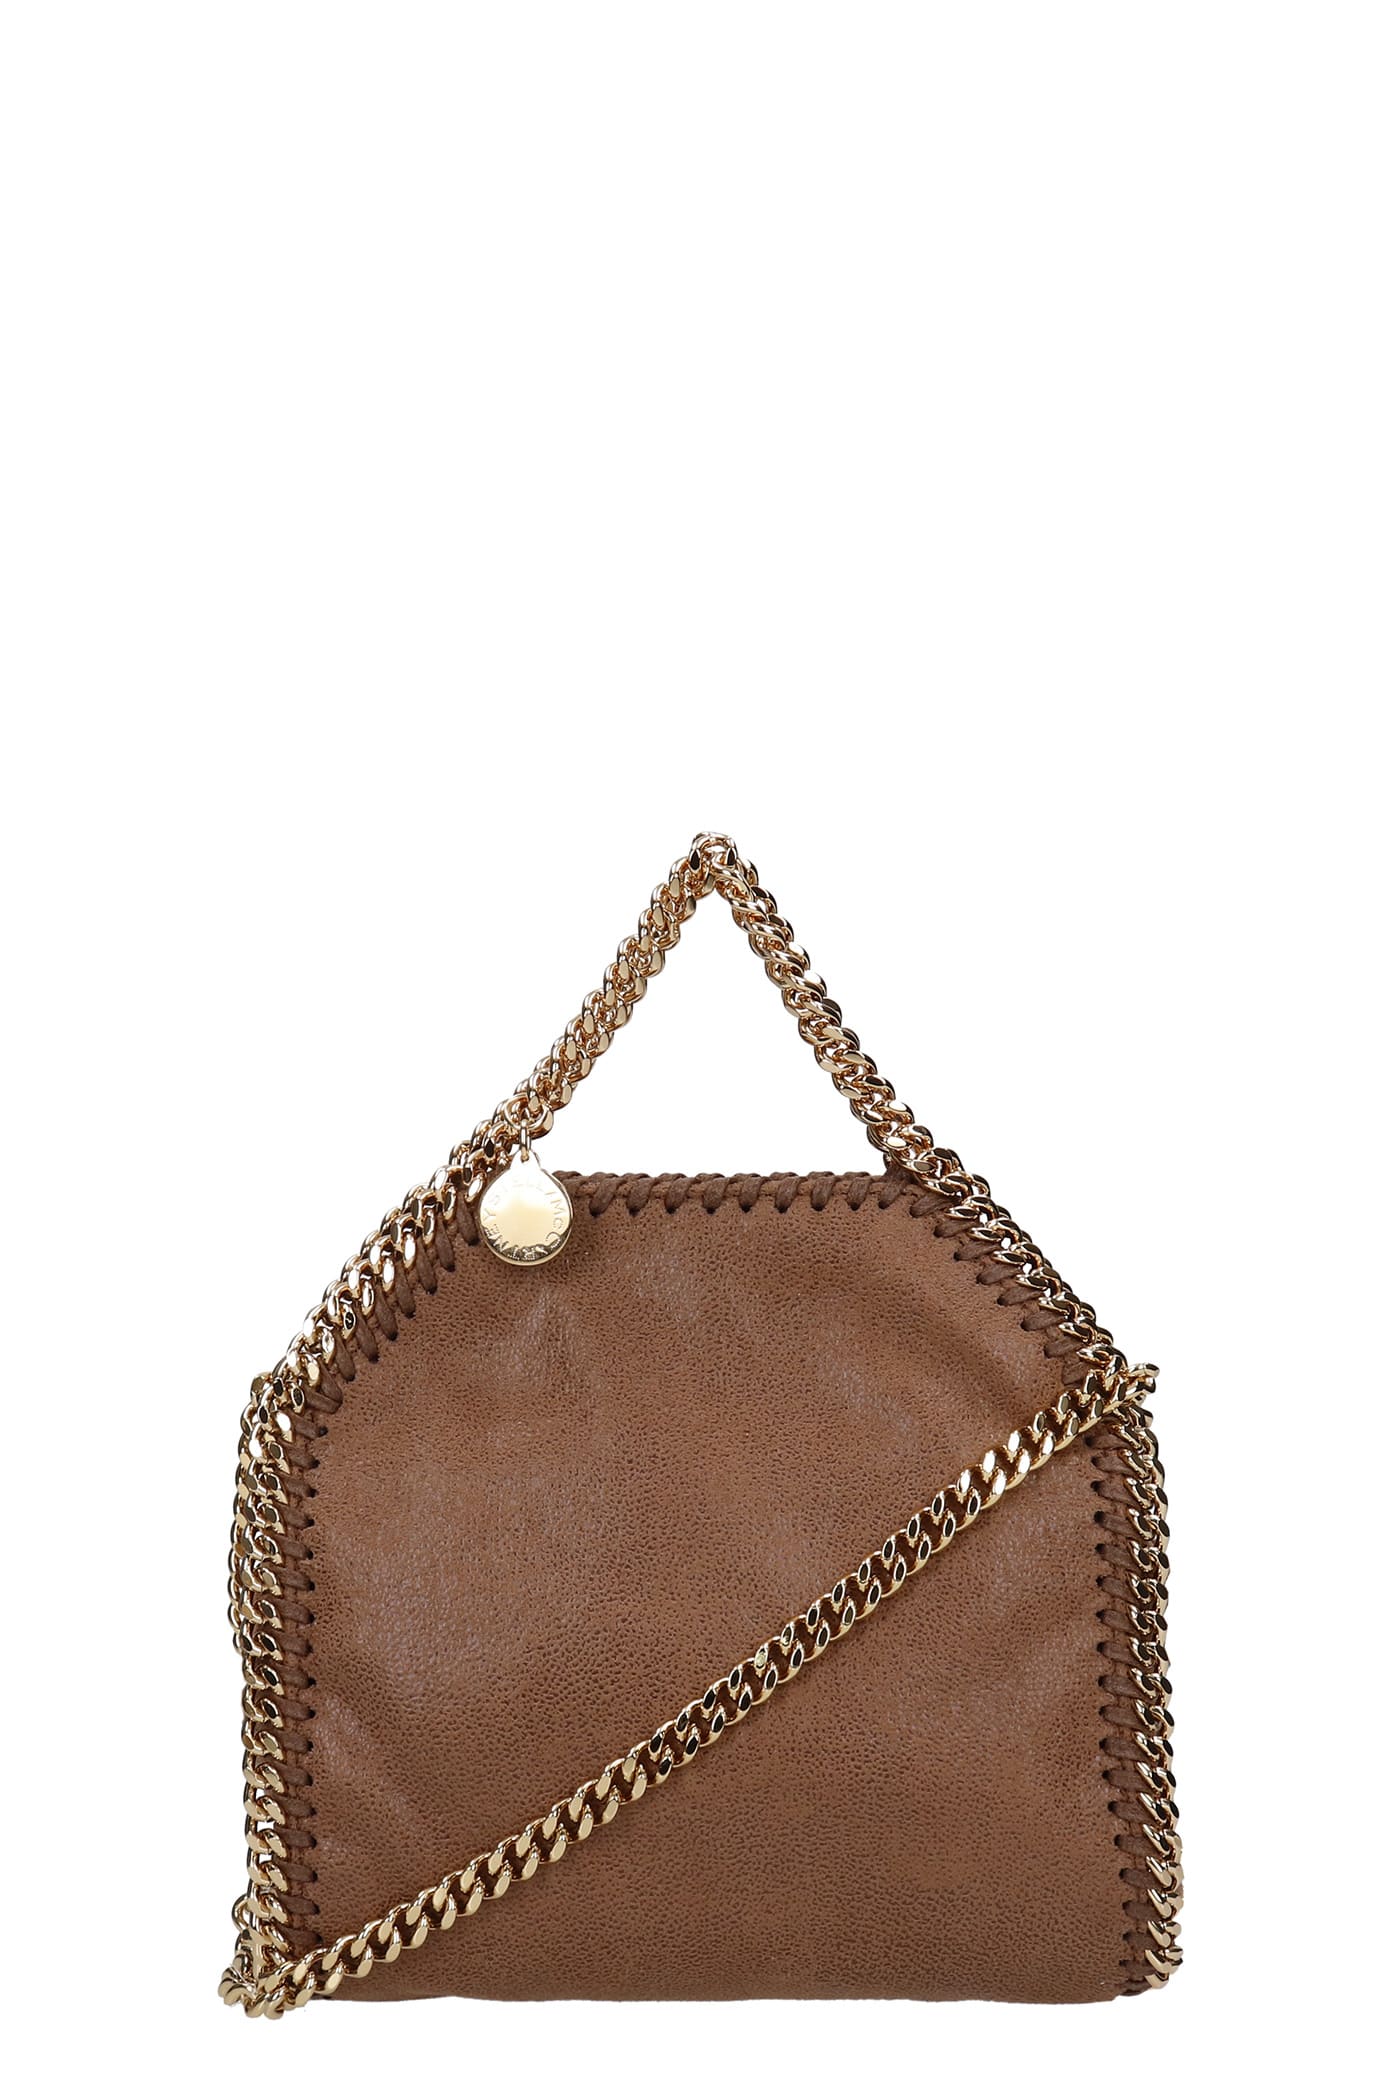 Stella McCartney Tote In Leather Color Faux Leather